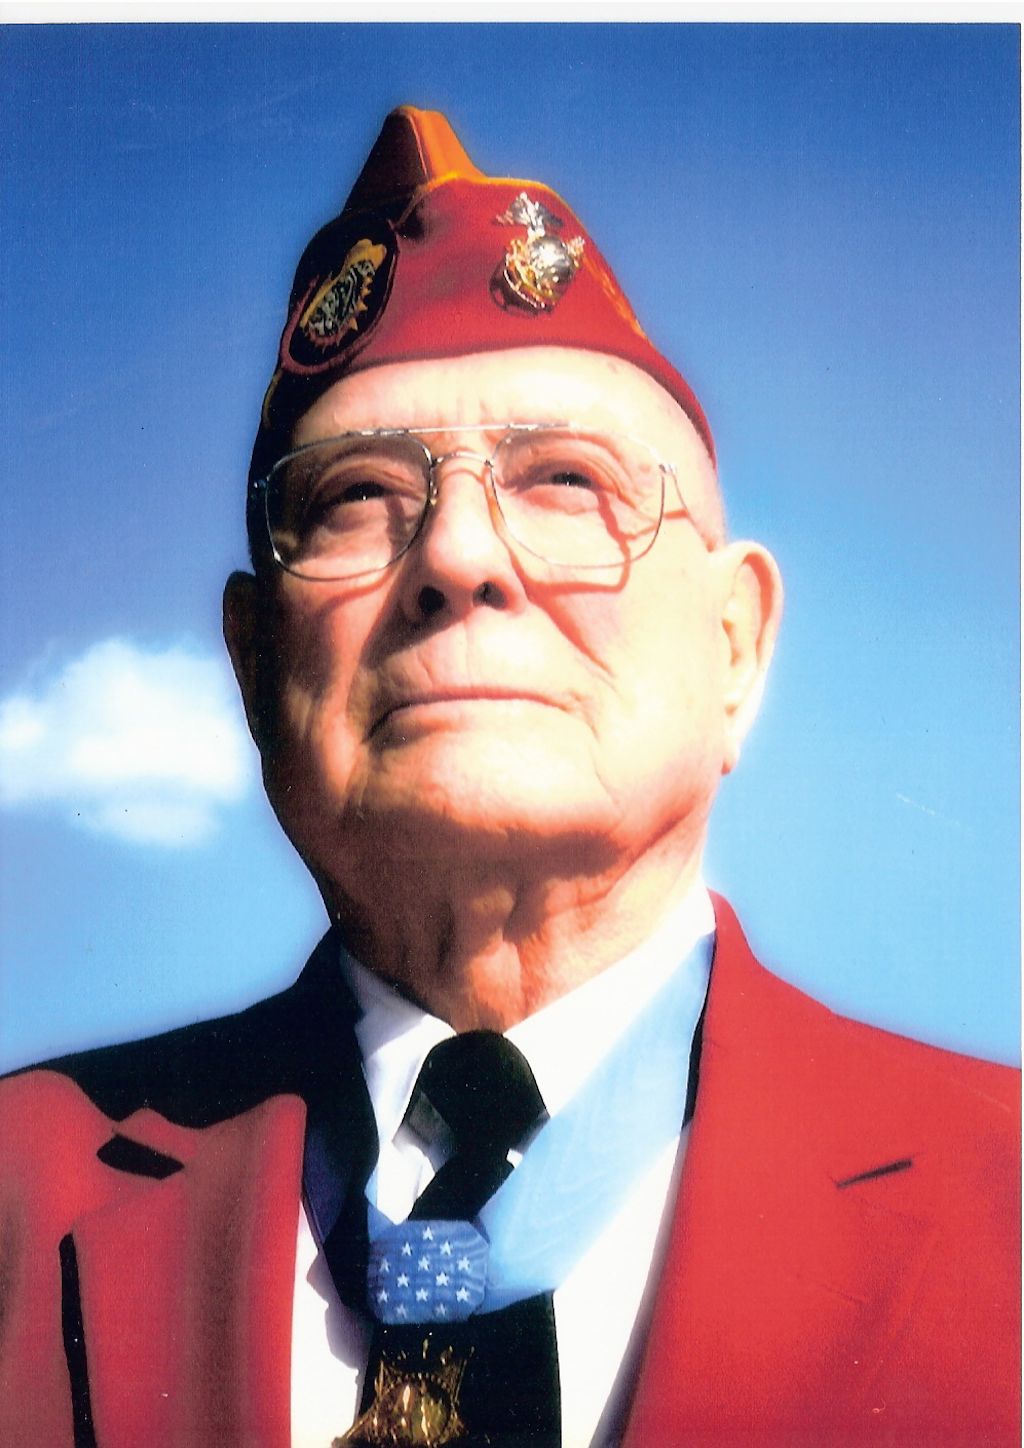 Recent photo of Hershel Williams wearing the Medal of Honor